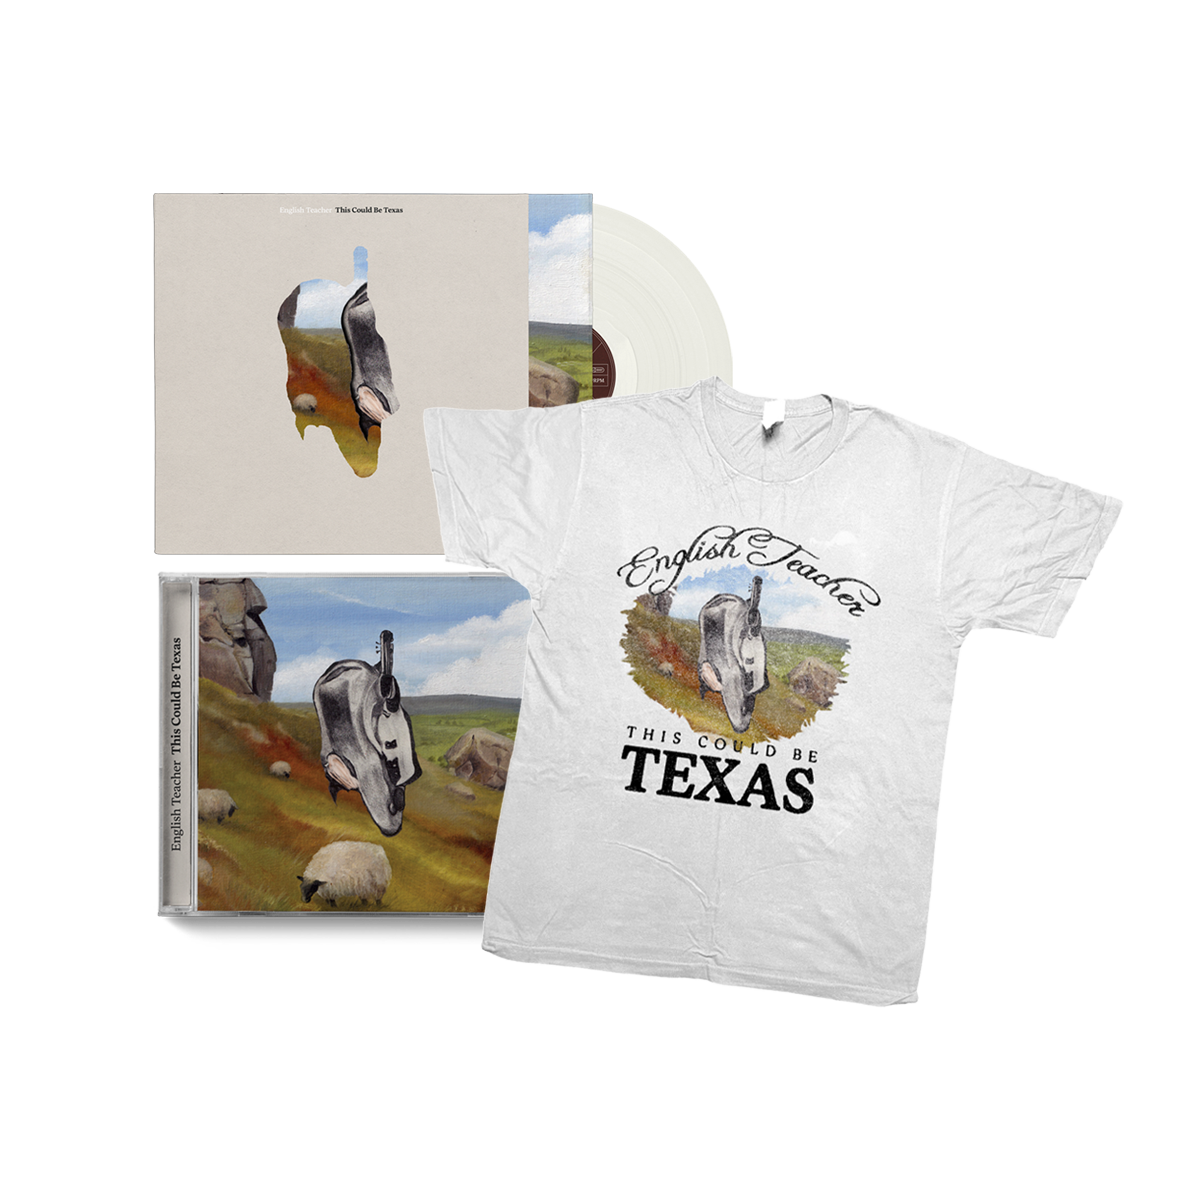 This Could Be Texas: Store Exclusive Milky White LP, CD + White T-shirt